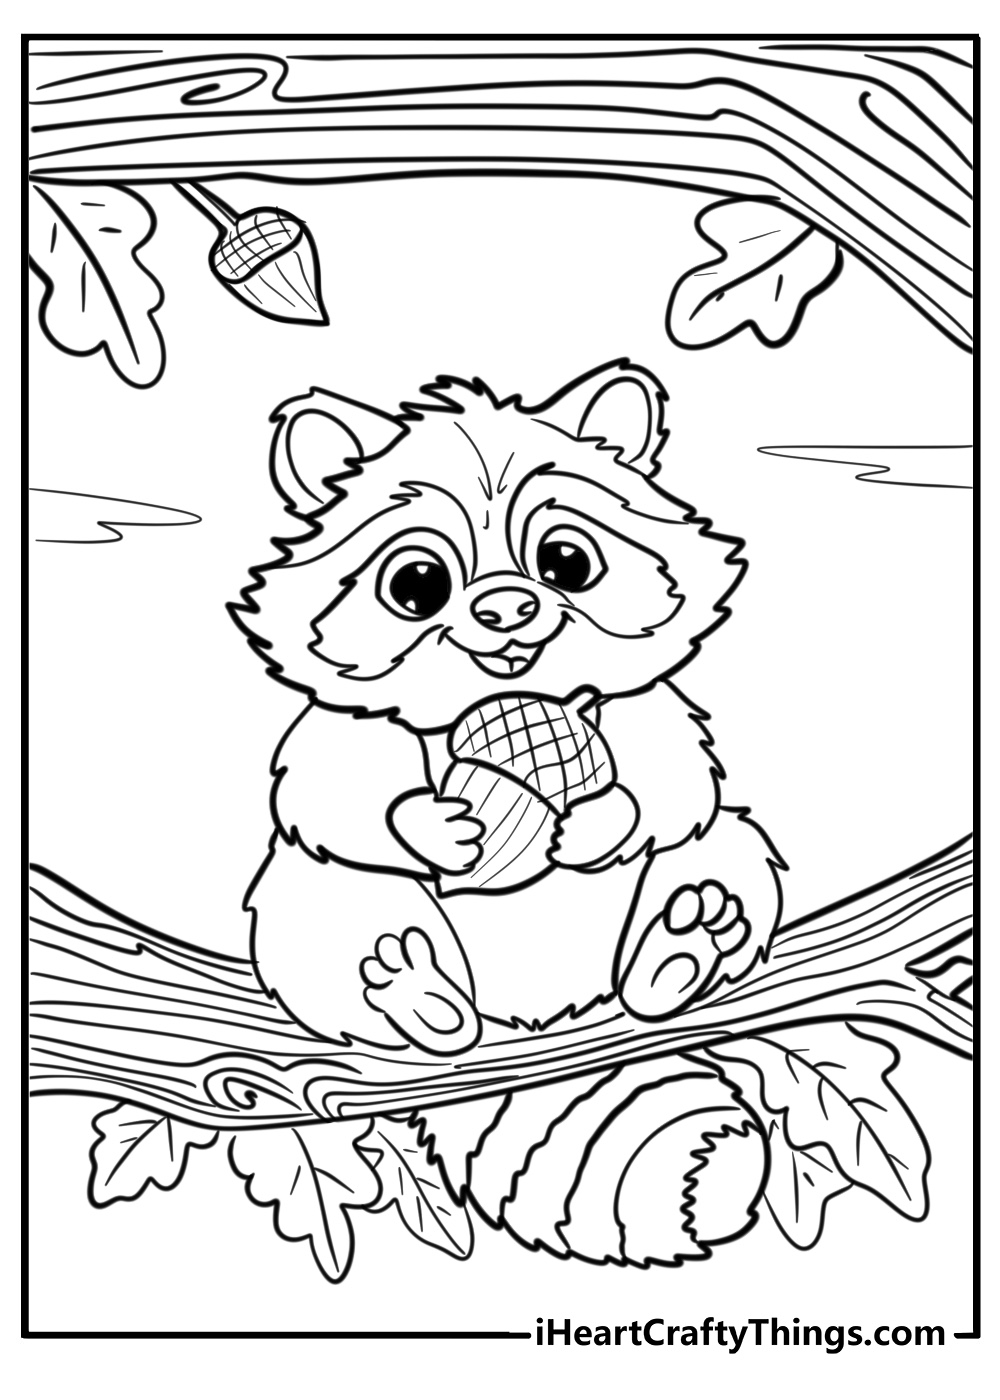 Cute animals coloring page of easy happy raccoon outline